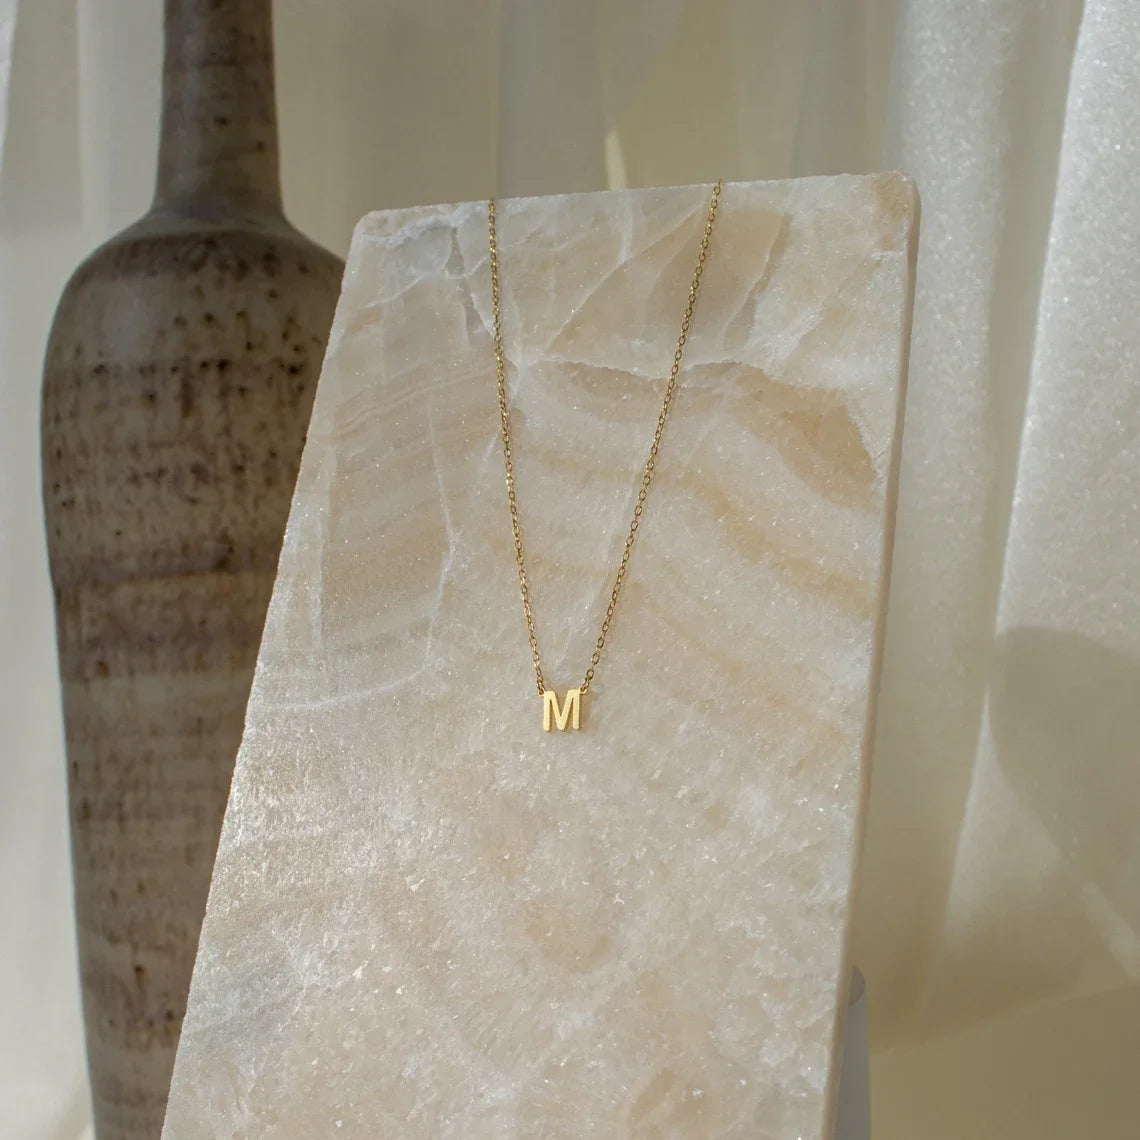 Necklace with your initial